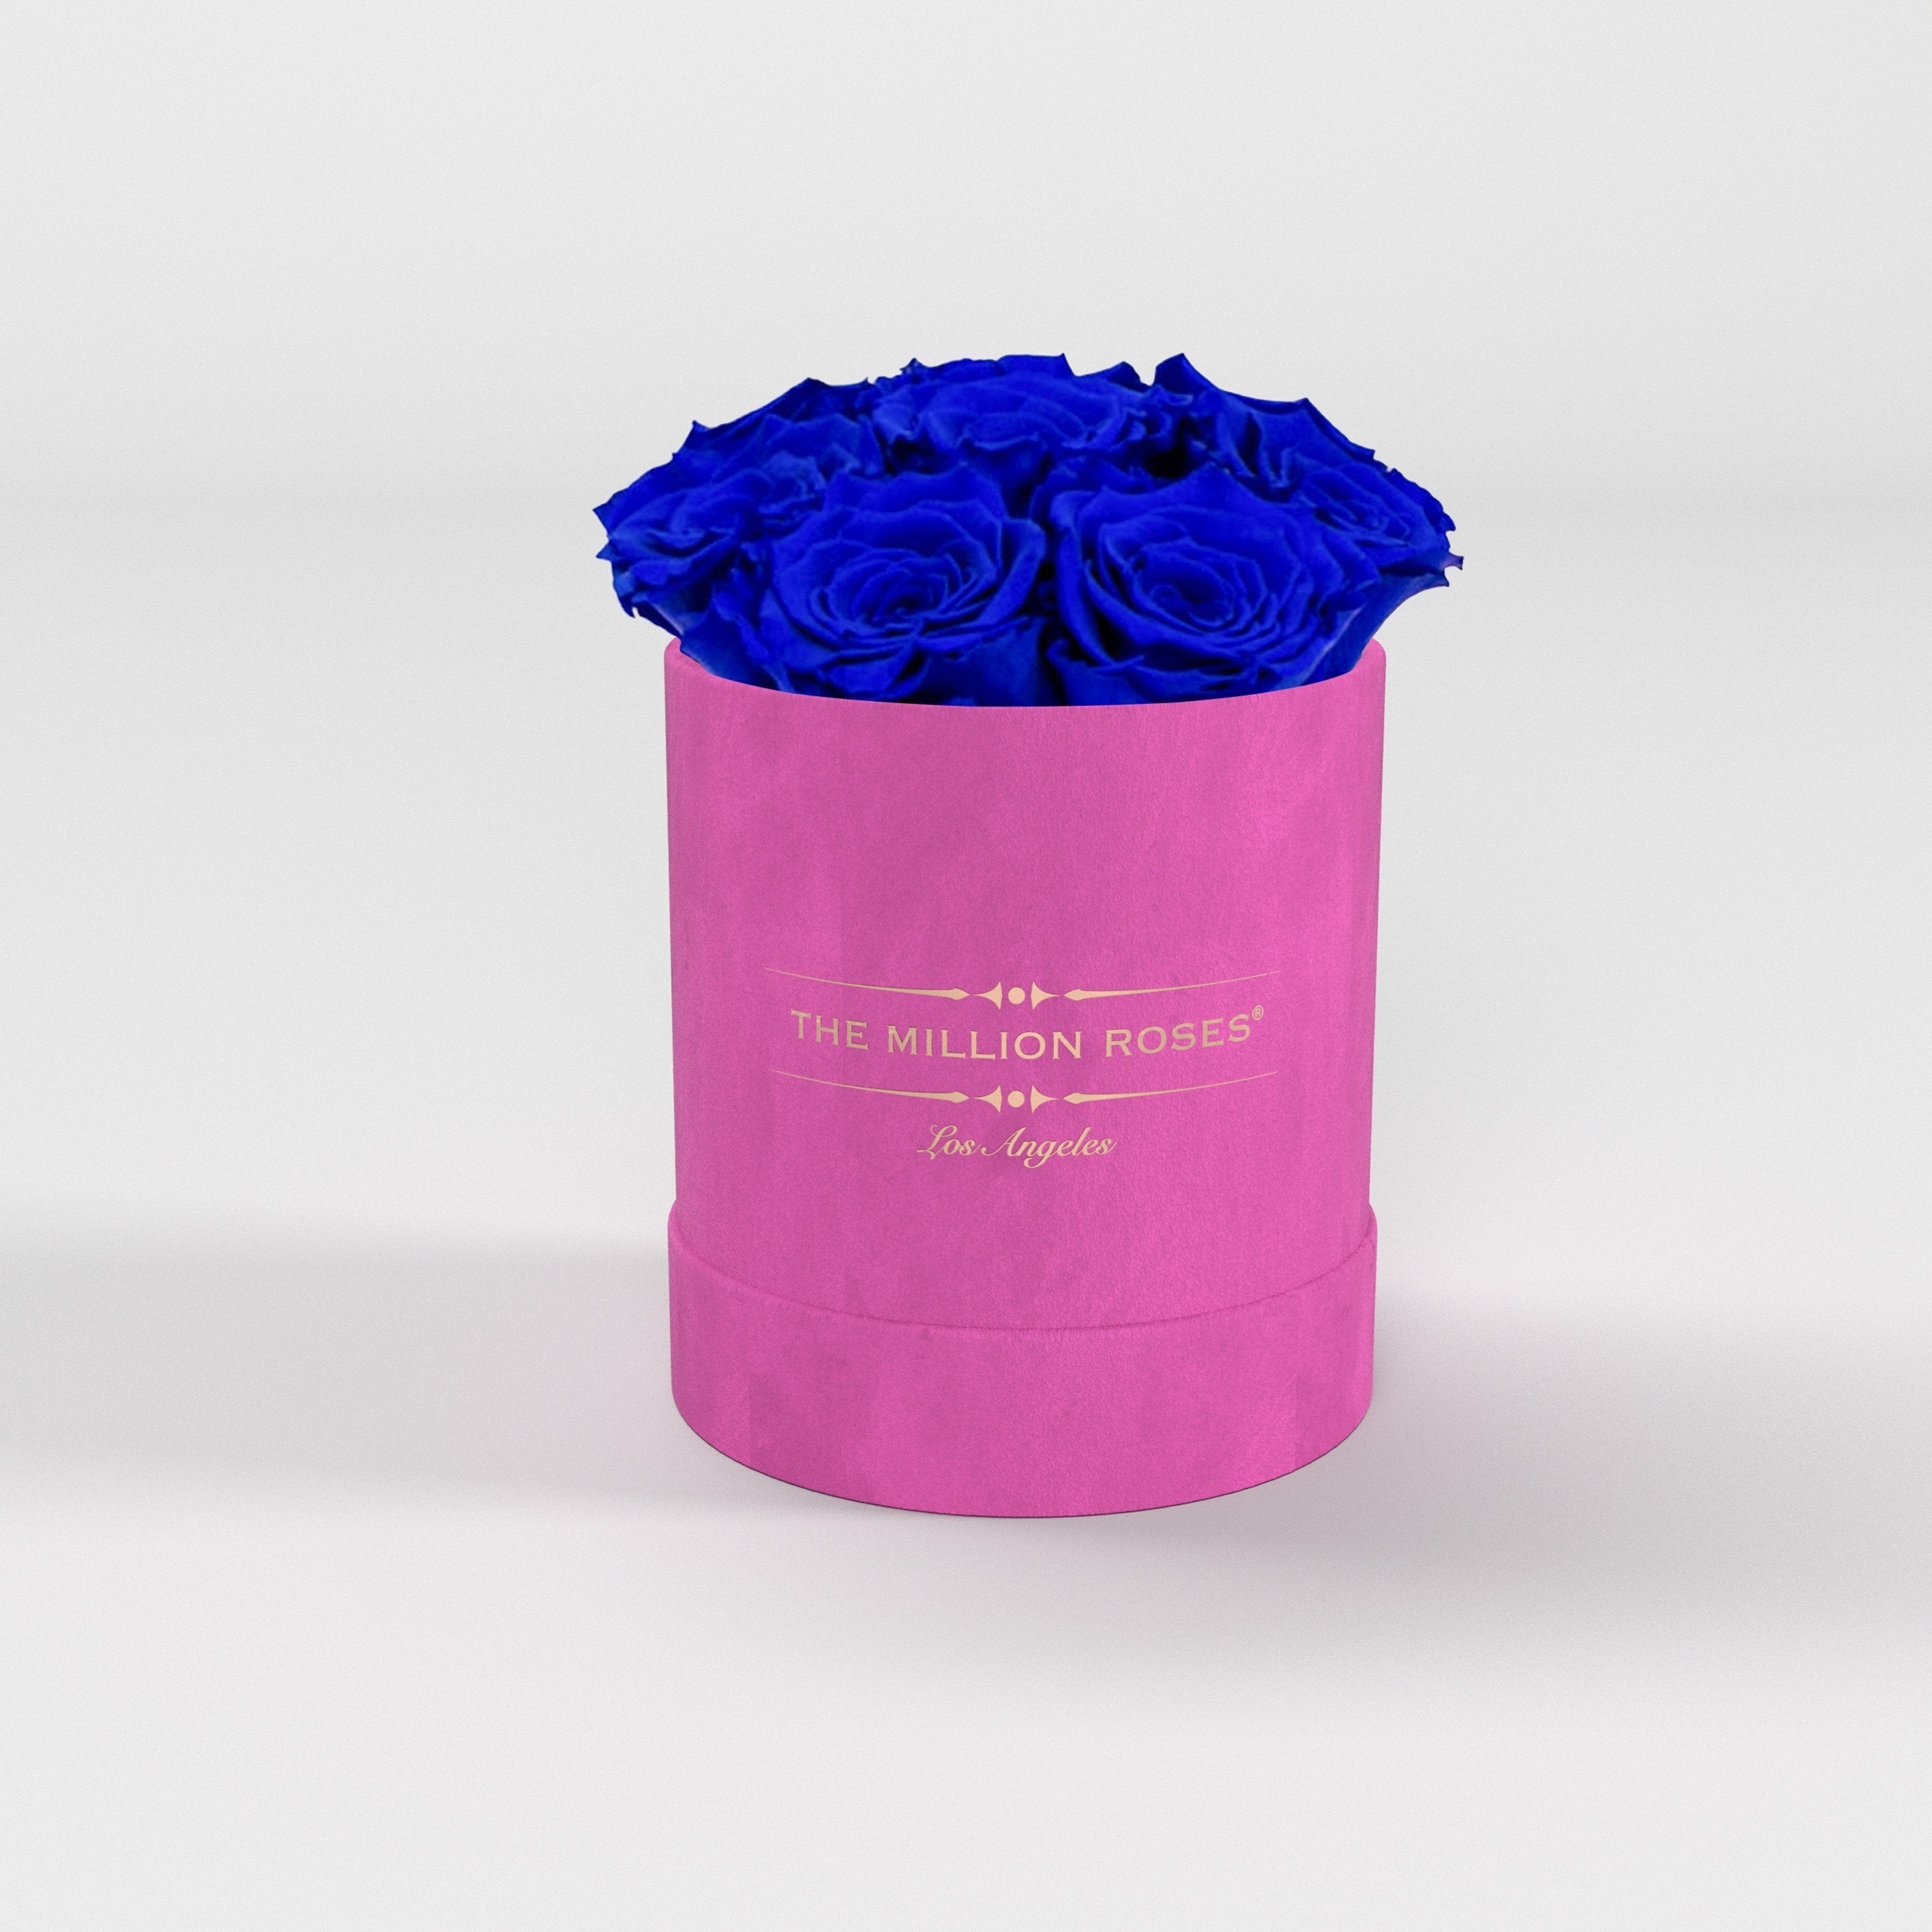 ( LA ) Hot Pink - Suede - Basic Box with Royal Blue Roses Kit - the million roses